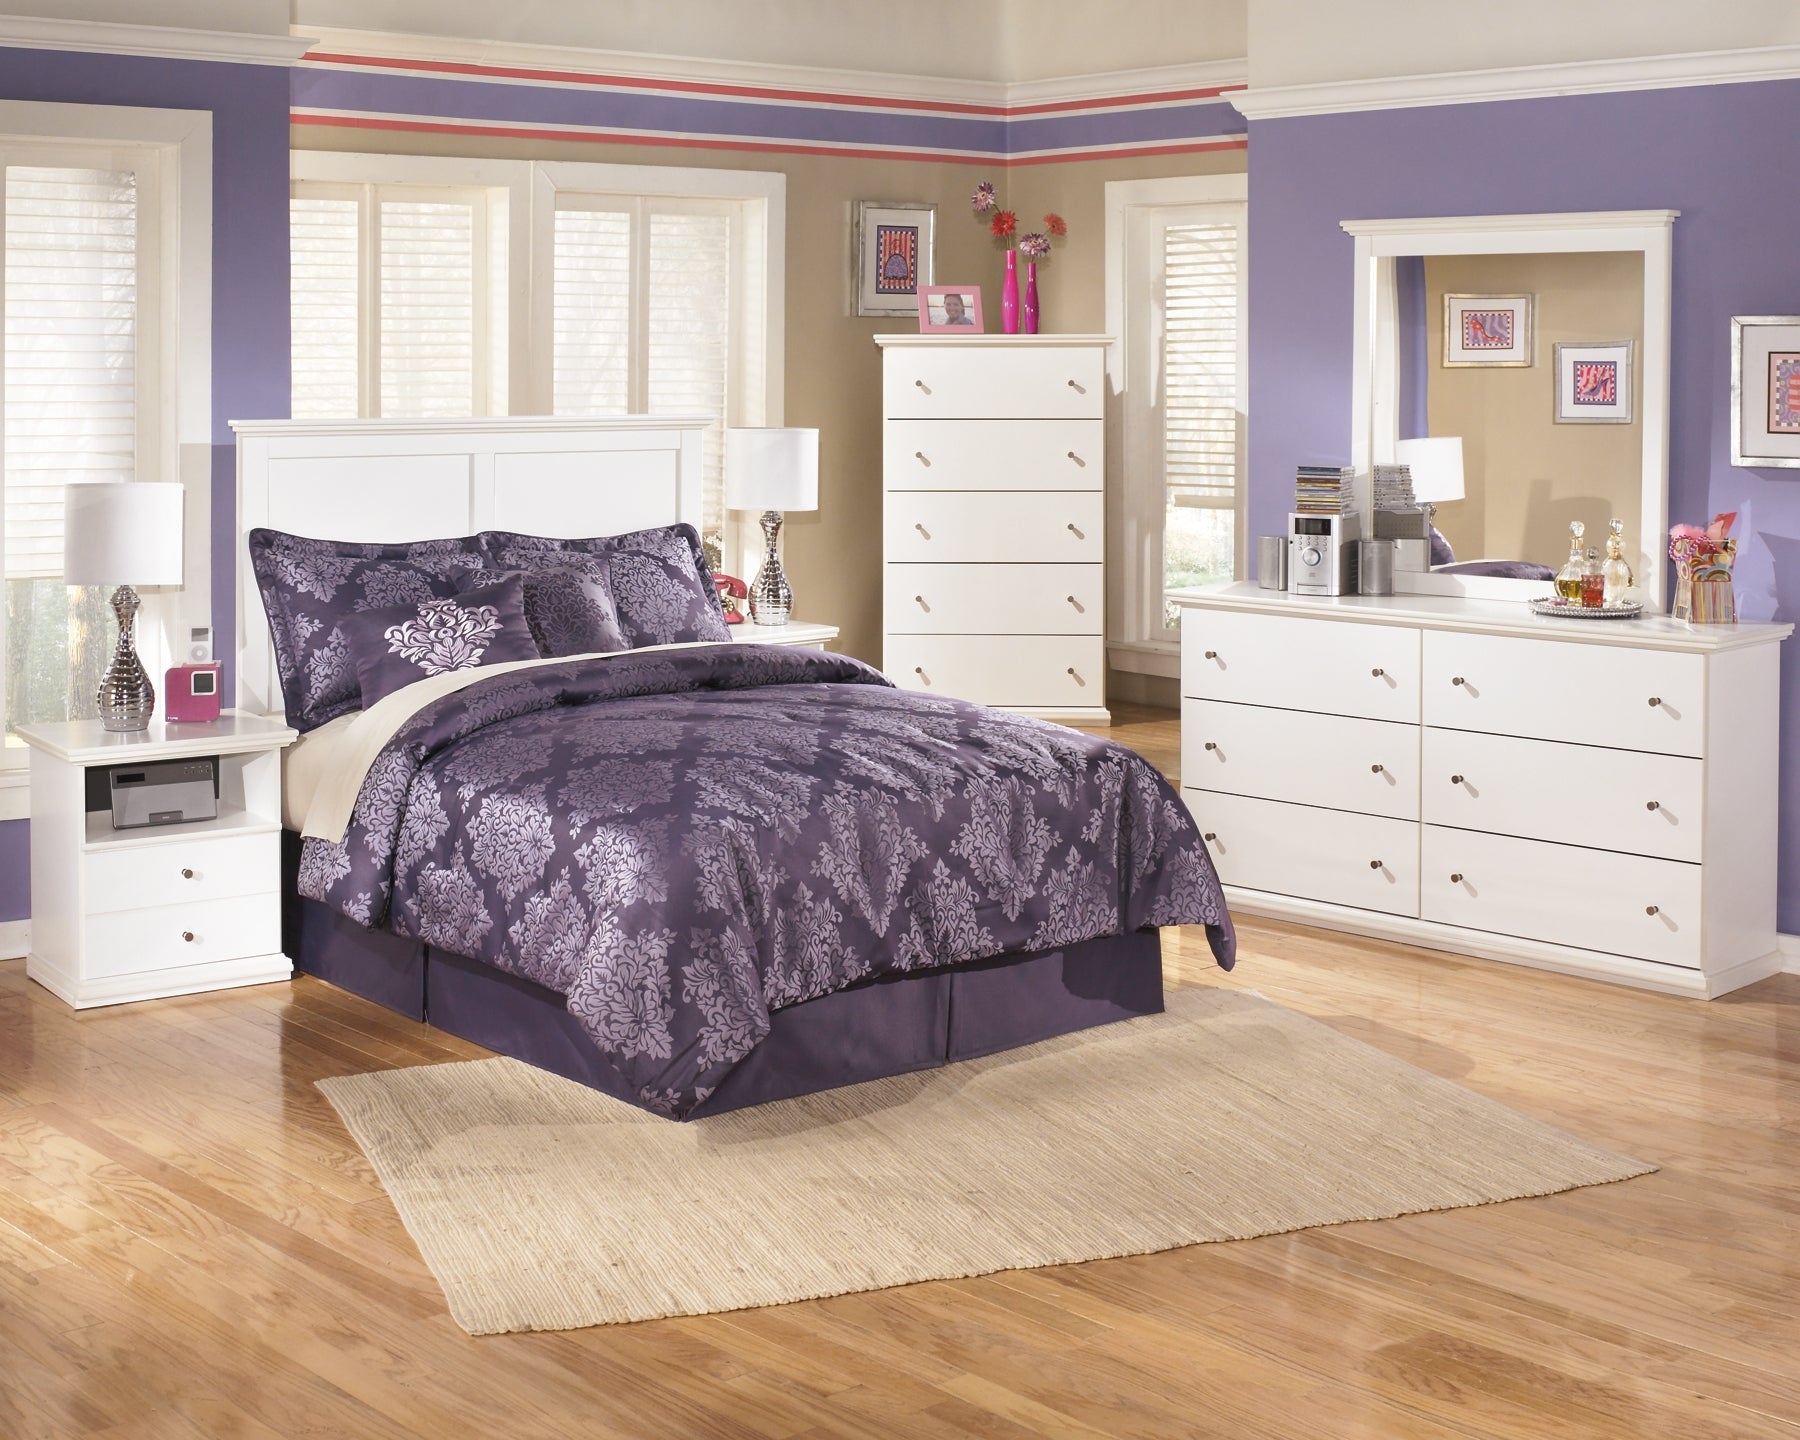 Bostwick Shoals Dresser and Mirror at Walker Mattress and Furniture Locations in Cedar Park and Belton TX.